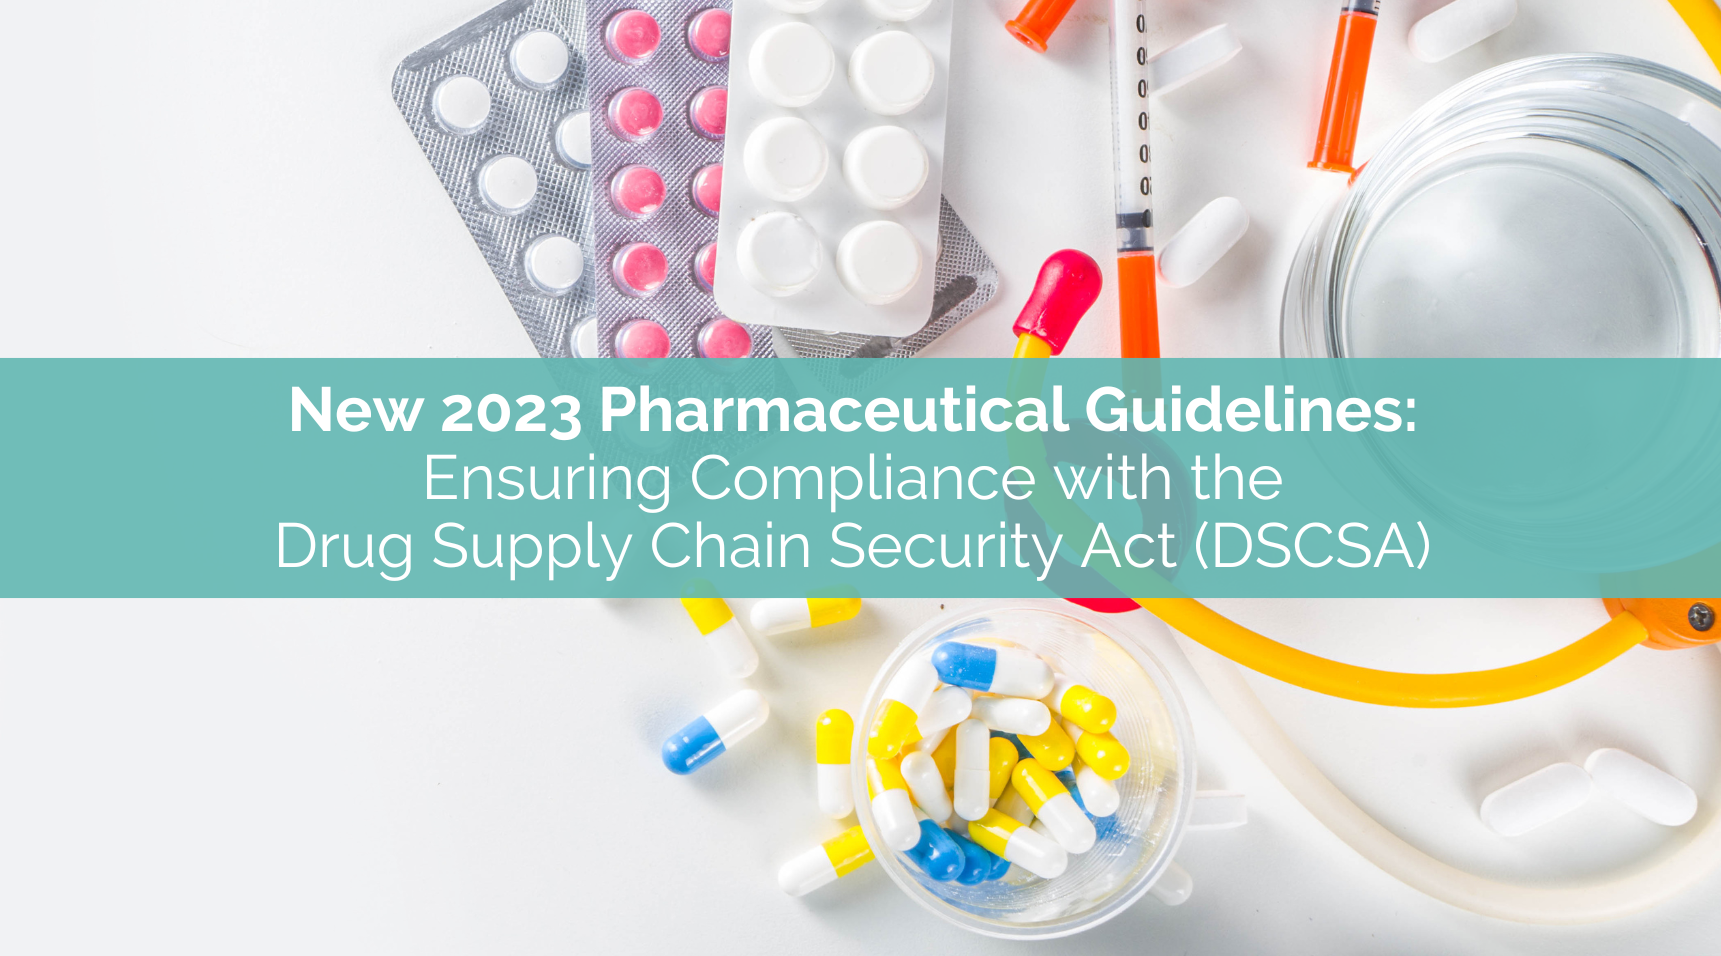 New 2023 Pharmaceutical Guidelines Ensuring Compliance with the Drug Supply Chain Security Act (DSCSA)  (1)